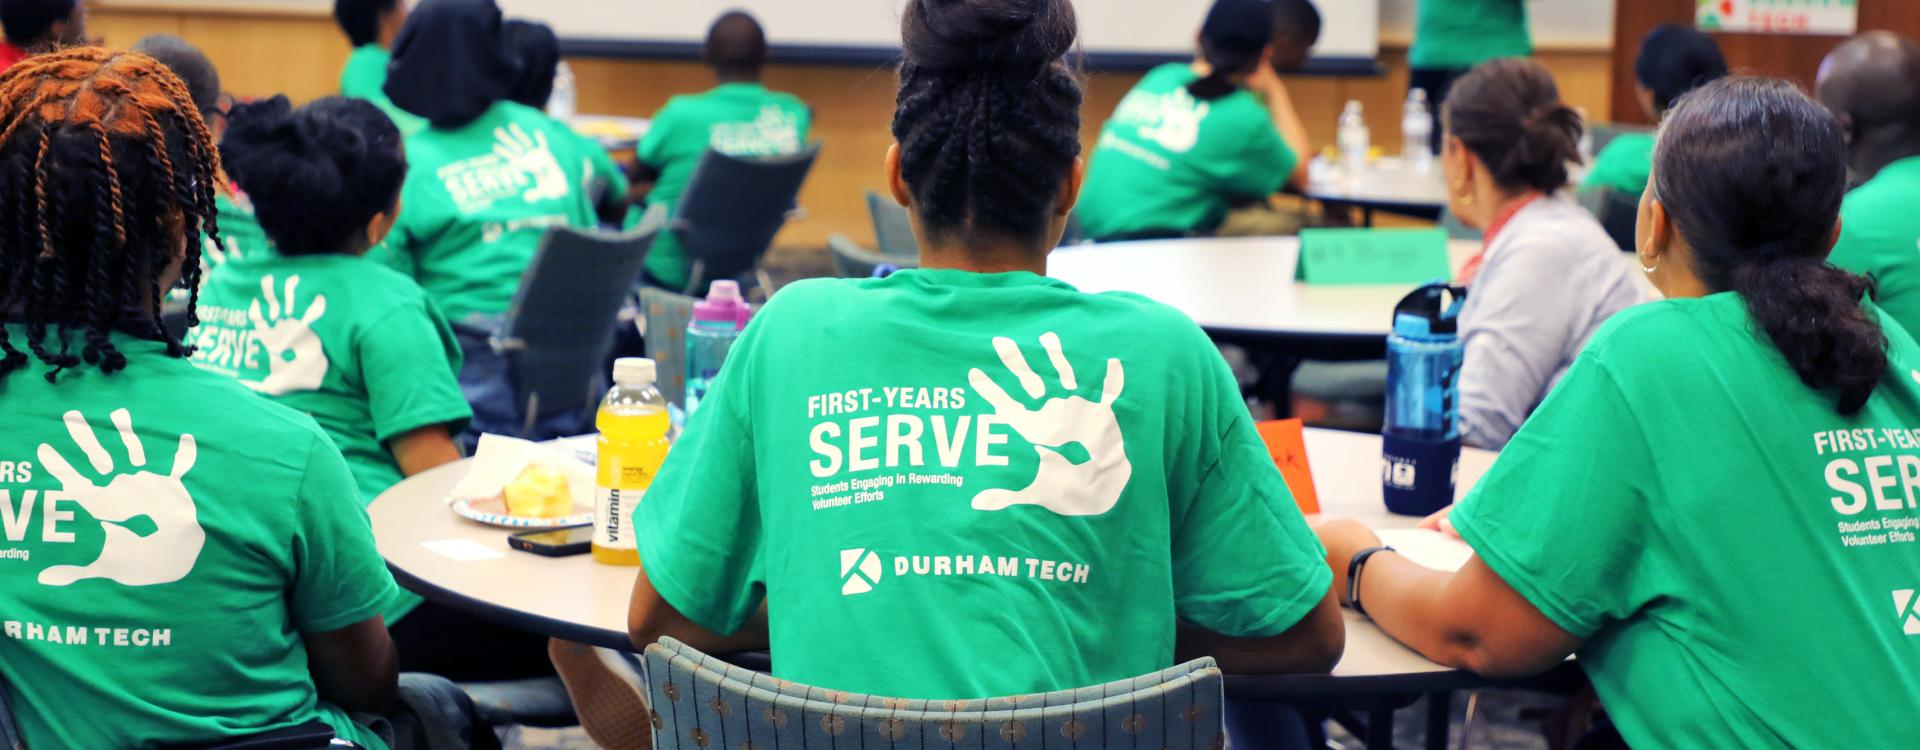 group of students wearing First-Year's Serve t-shirts